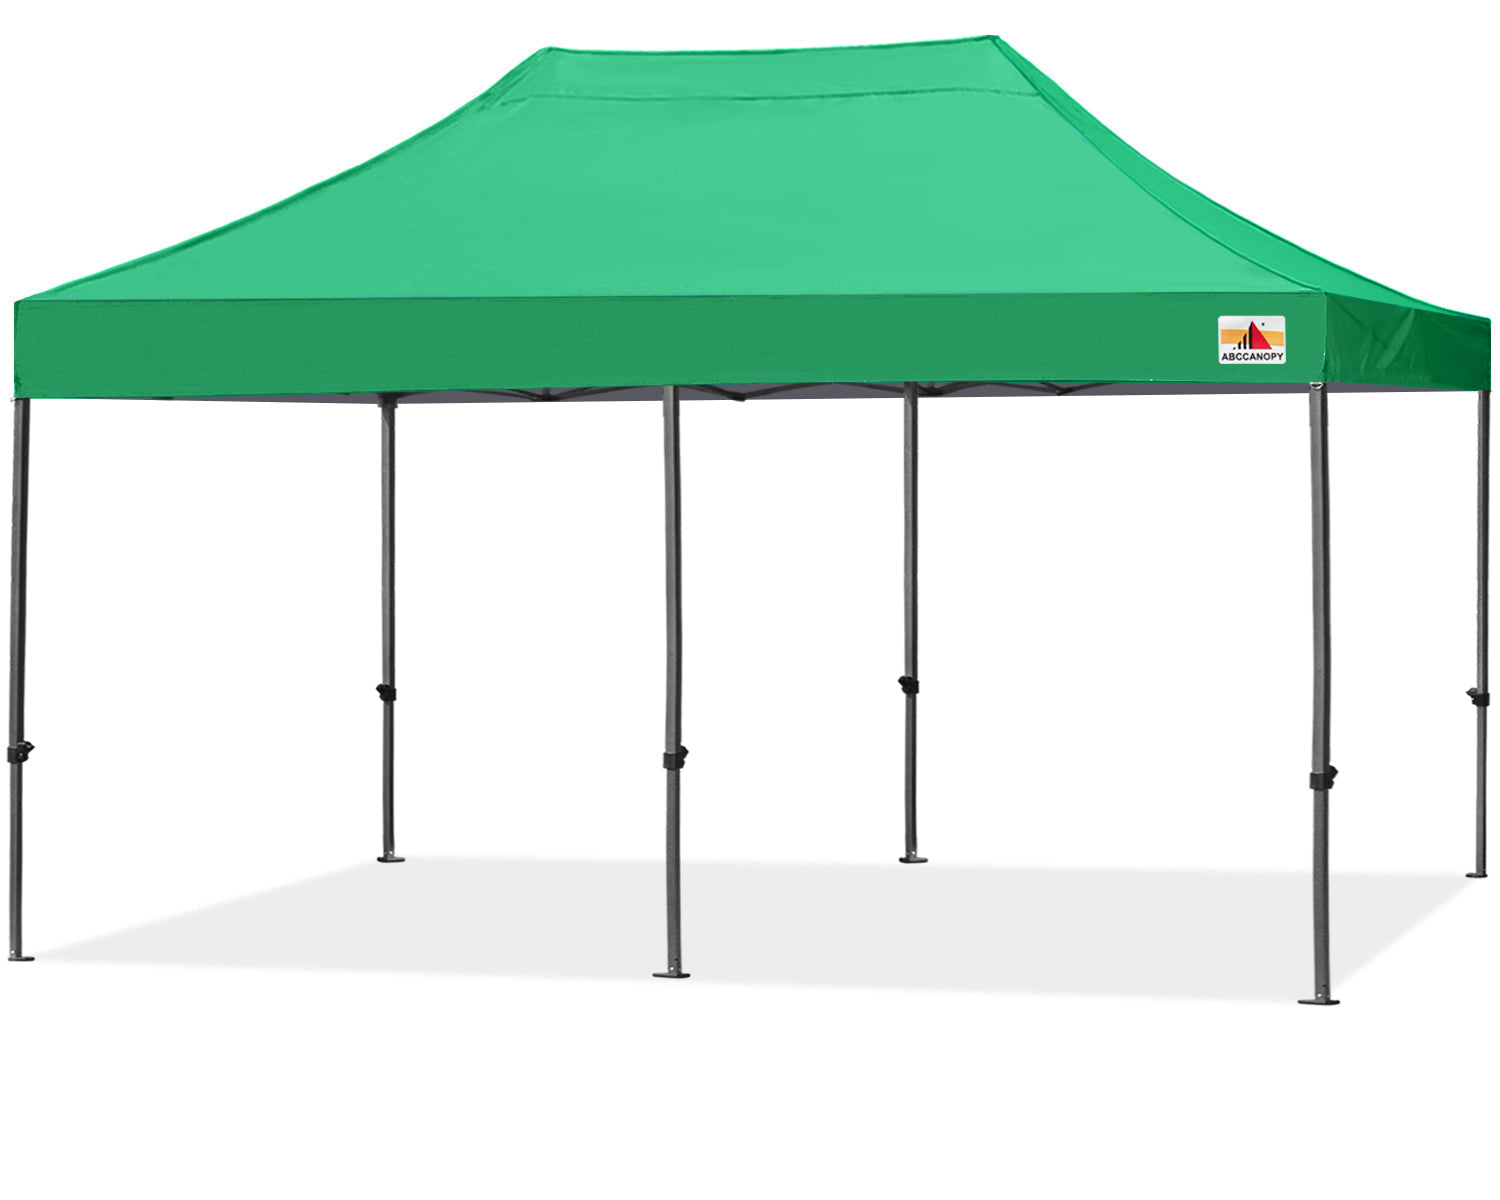 S1 Commercial Durable Easy Pop Up Canopy Tent 10x20 Instant Shelter